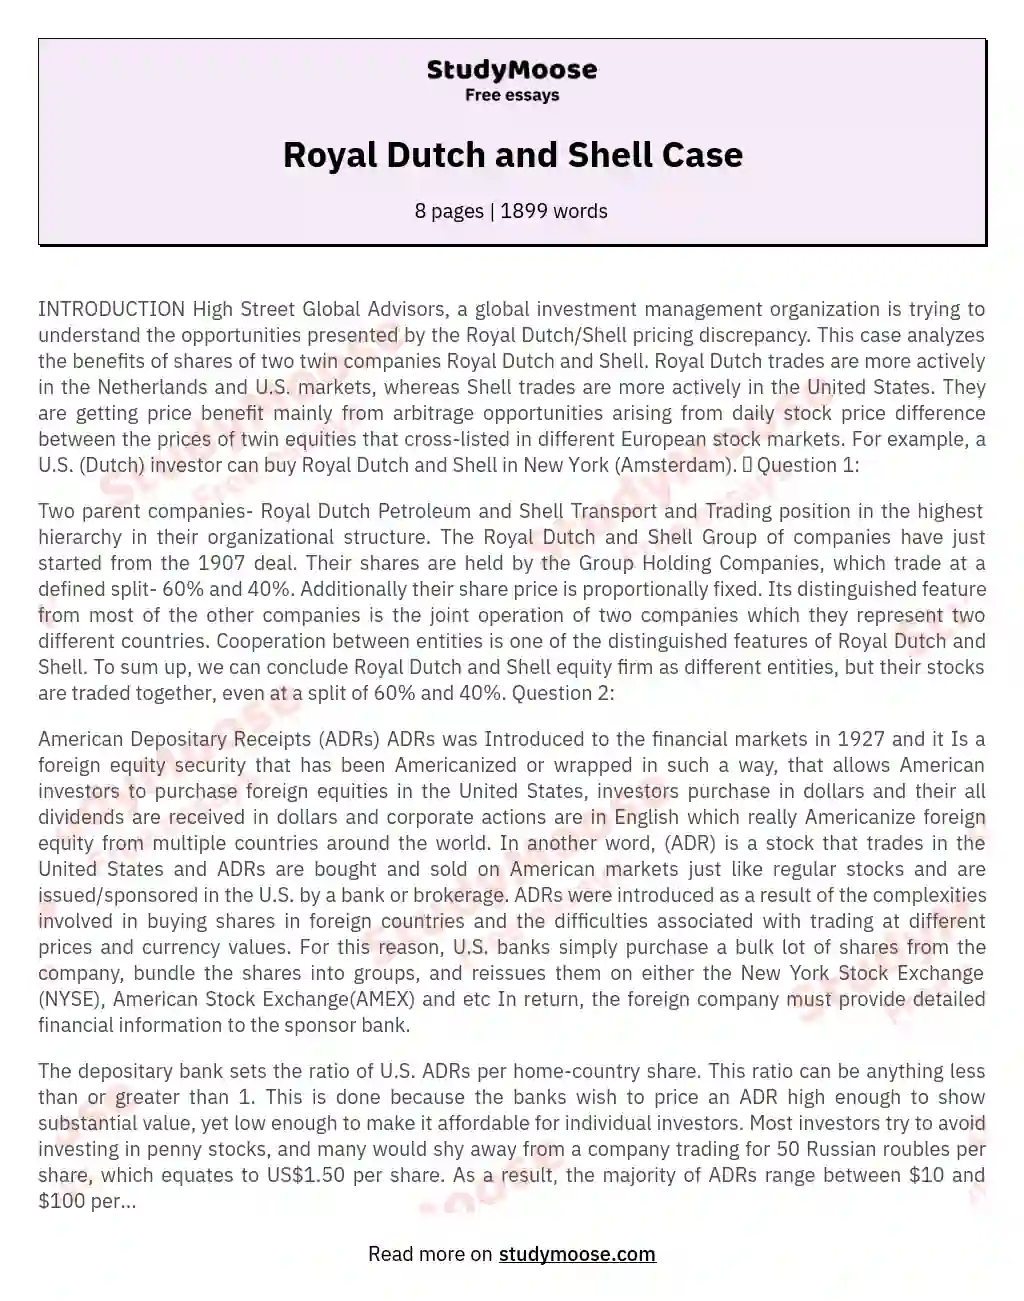 Investing in Royal Dutch and Shell: A Case Study on Arbitrage Opportunities essay